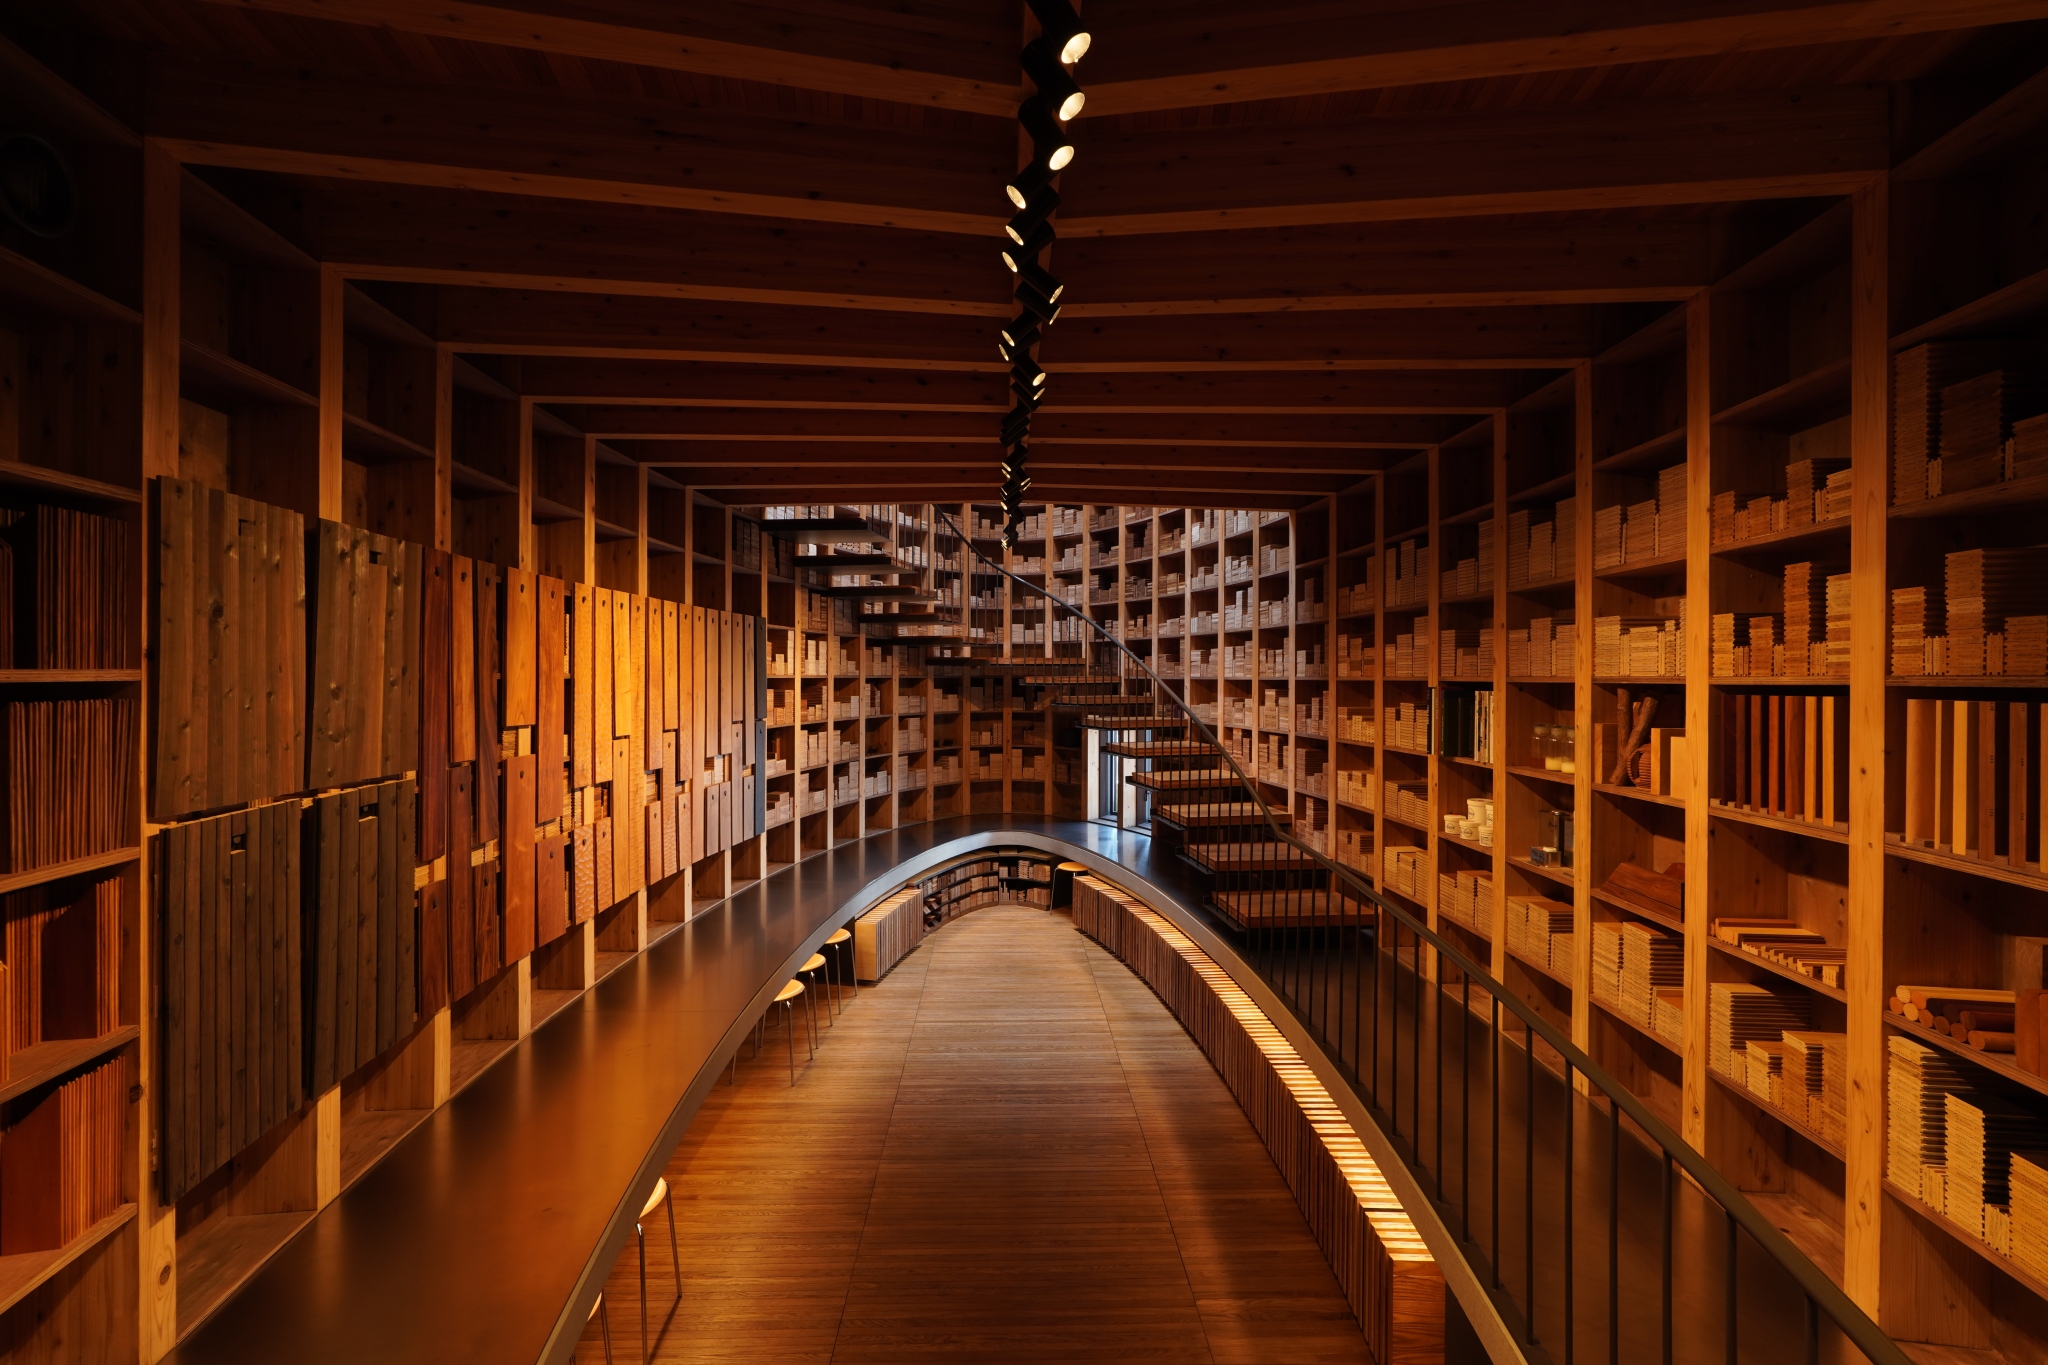 Atrium of a large library with wooden shelves and beams